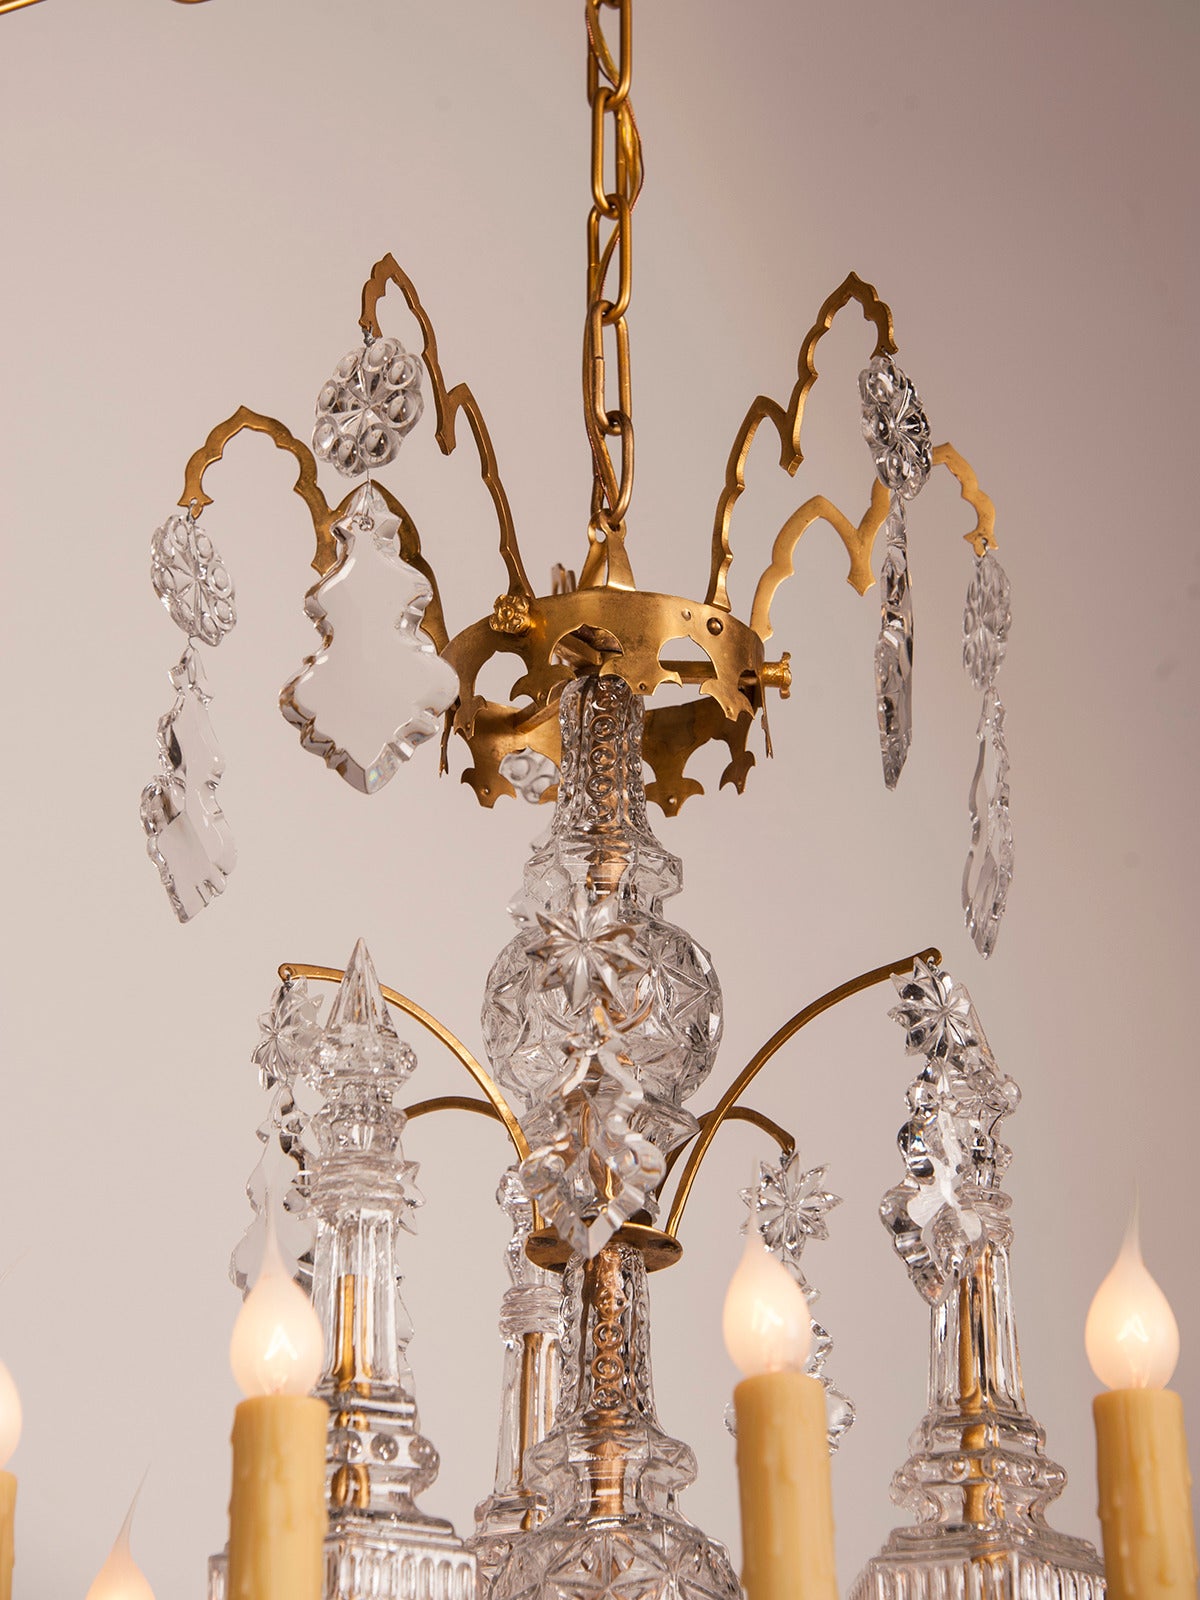 A gorgeous ten-arm gilded bronze antique French Louis XV style crystal chandelier from France circa 1875 affixed with an abundance of crystal and glass pendants. This antique French chandelier has a unique appearance because of the use of highly